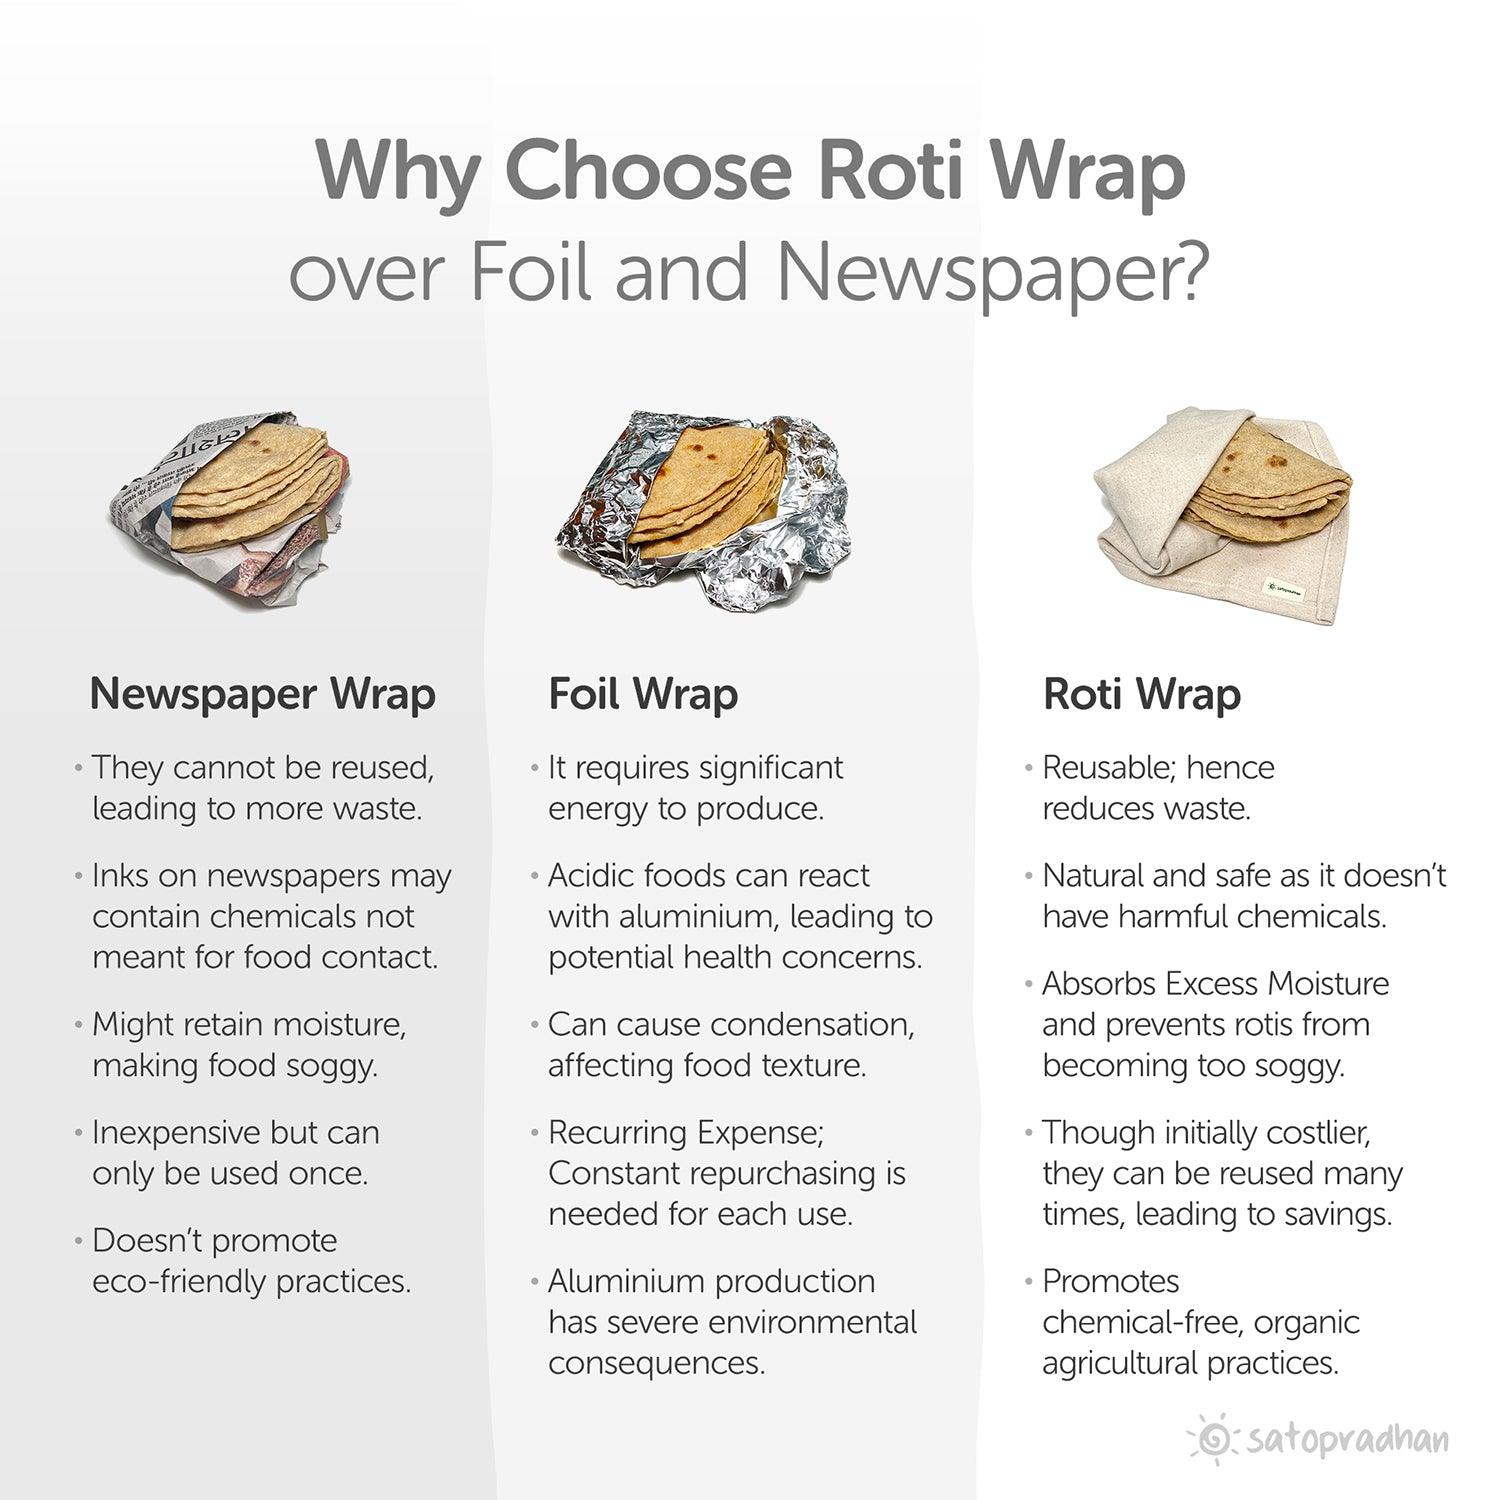 Roti wrap is safe, natural and reused comparitively to aluminium foil and newspaper